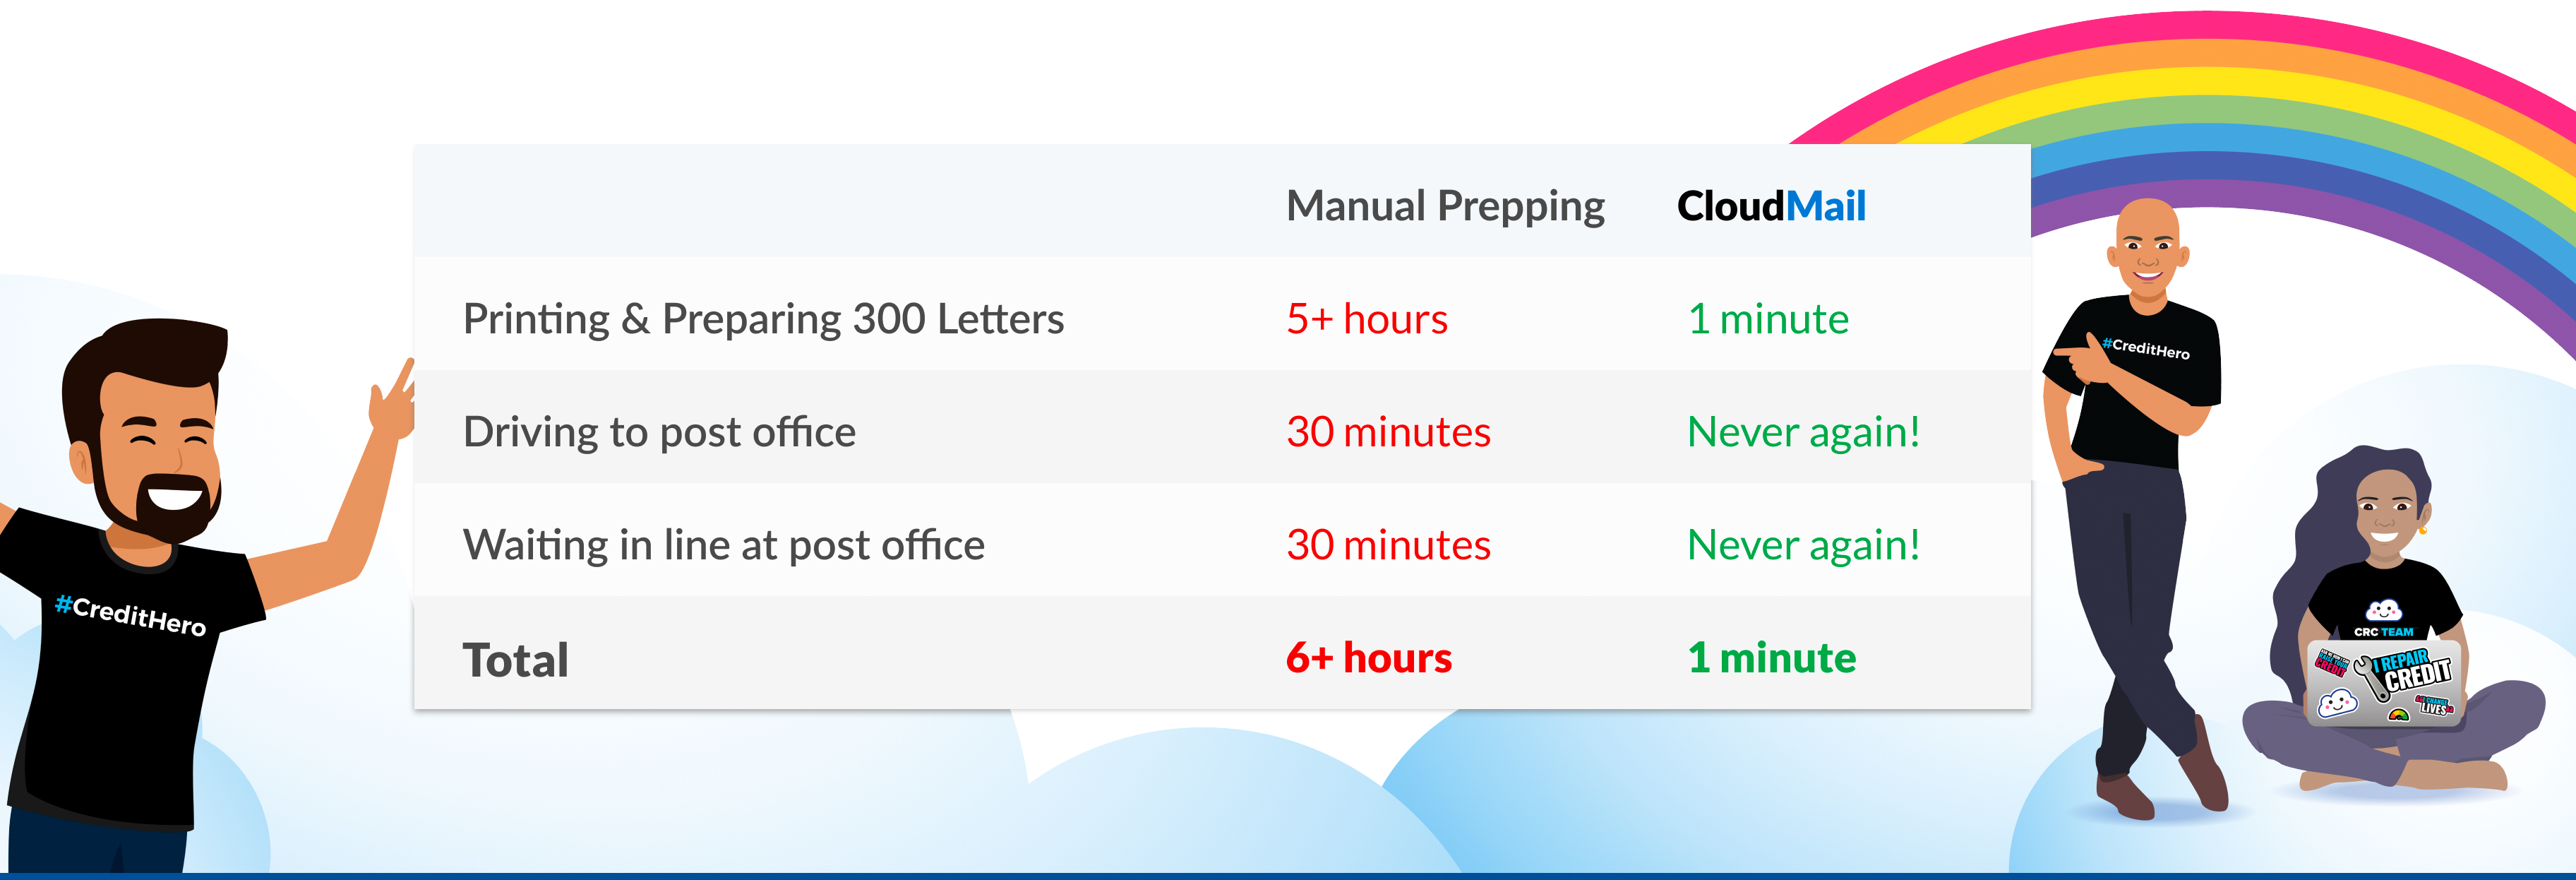 CloudMail Save Time